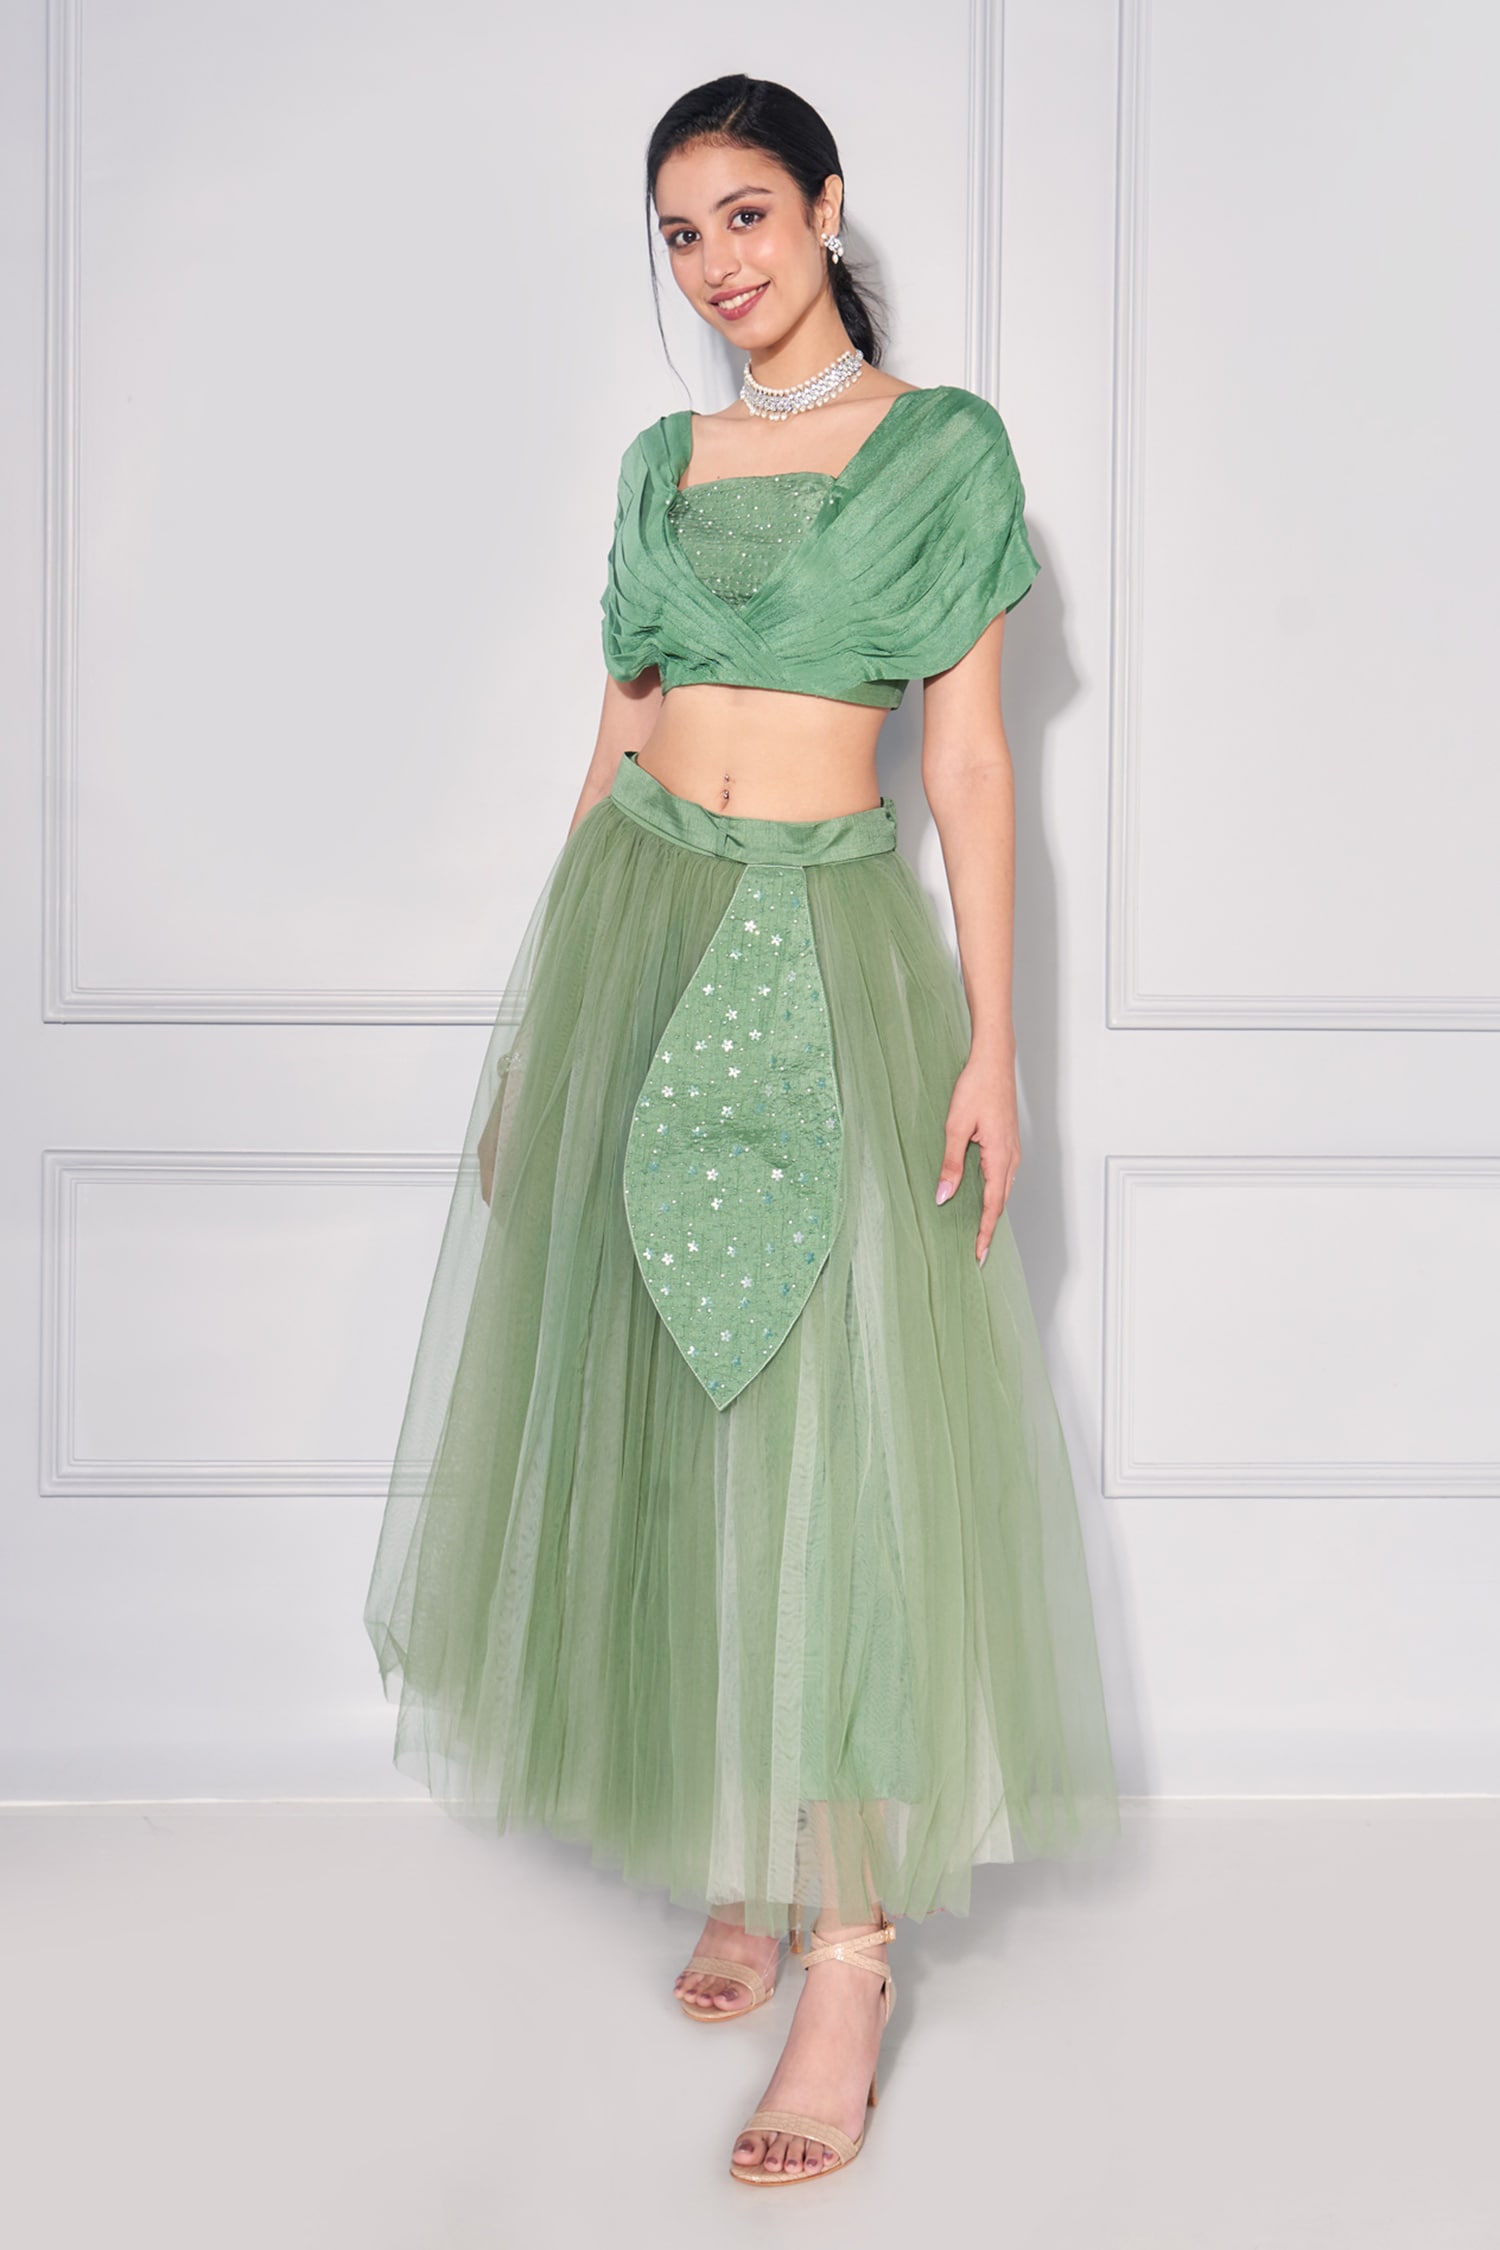 Beautiful pista green color tulli skirt and crop top with bell sleeves  Brook collection of Mrunalini